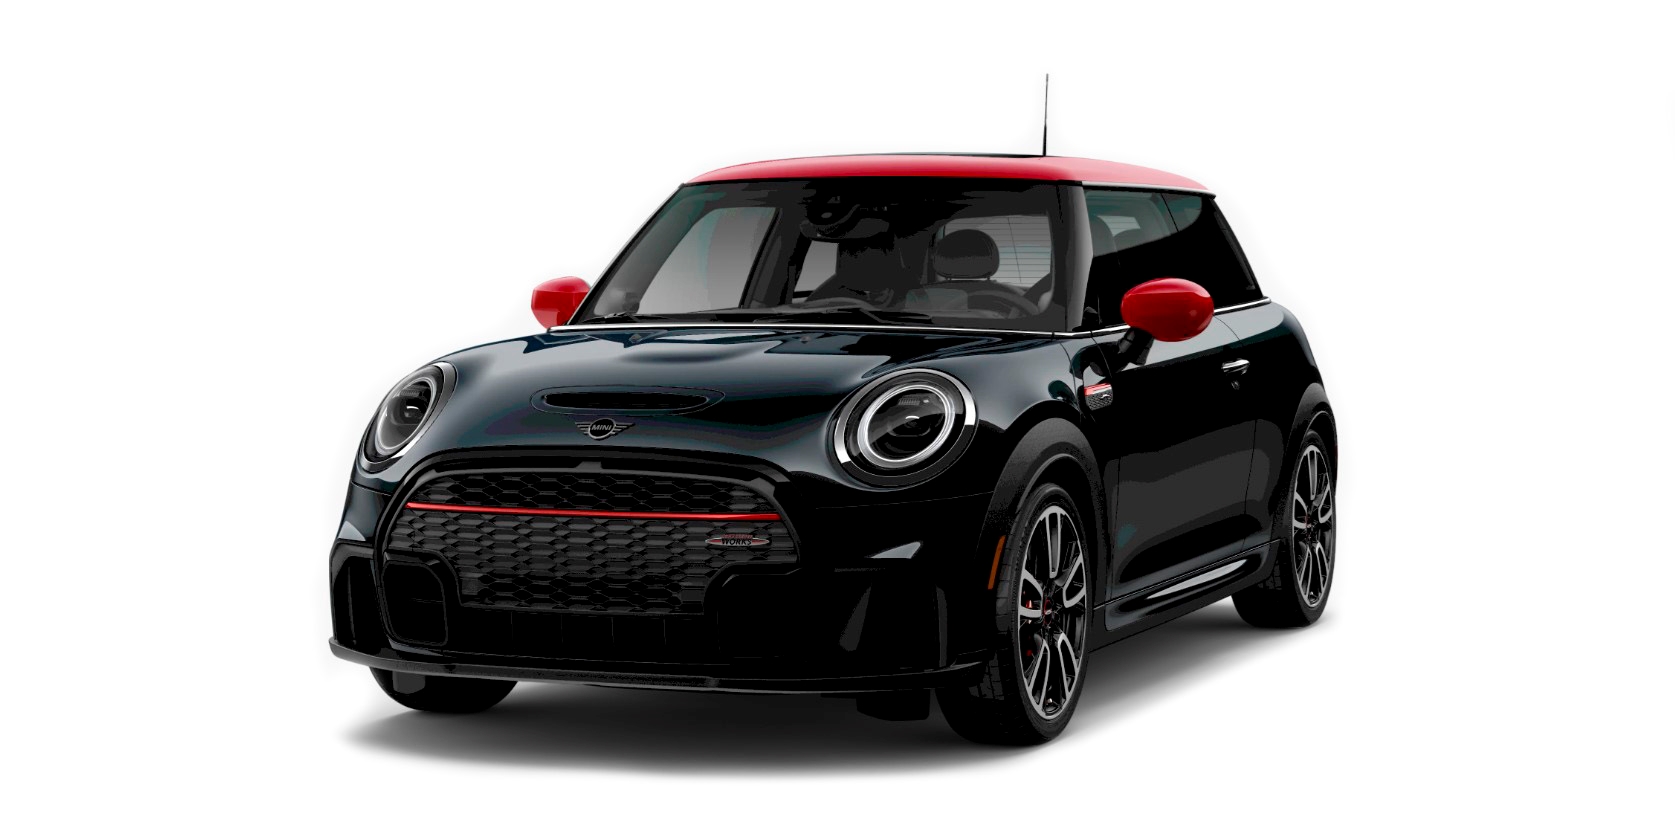 2023 Mini John Cooper Works Hardtop Full Specs, Features and Price